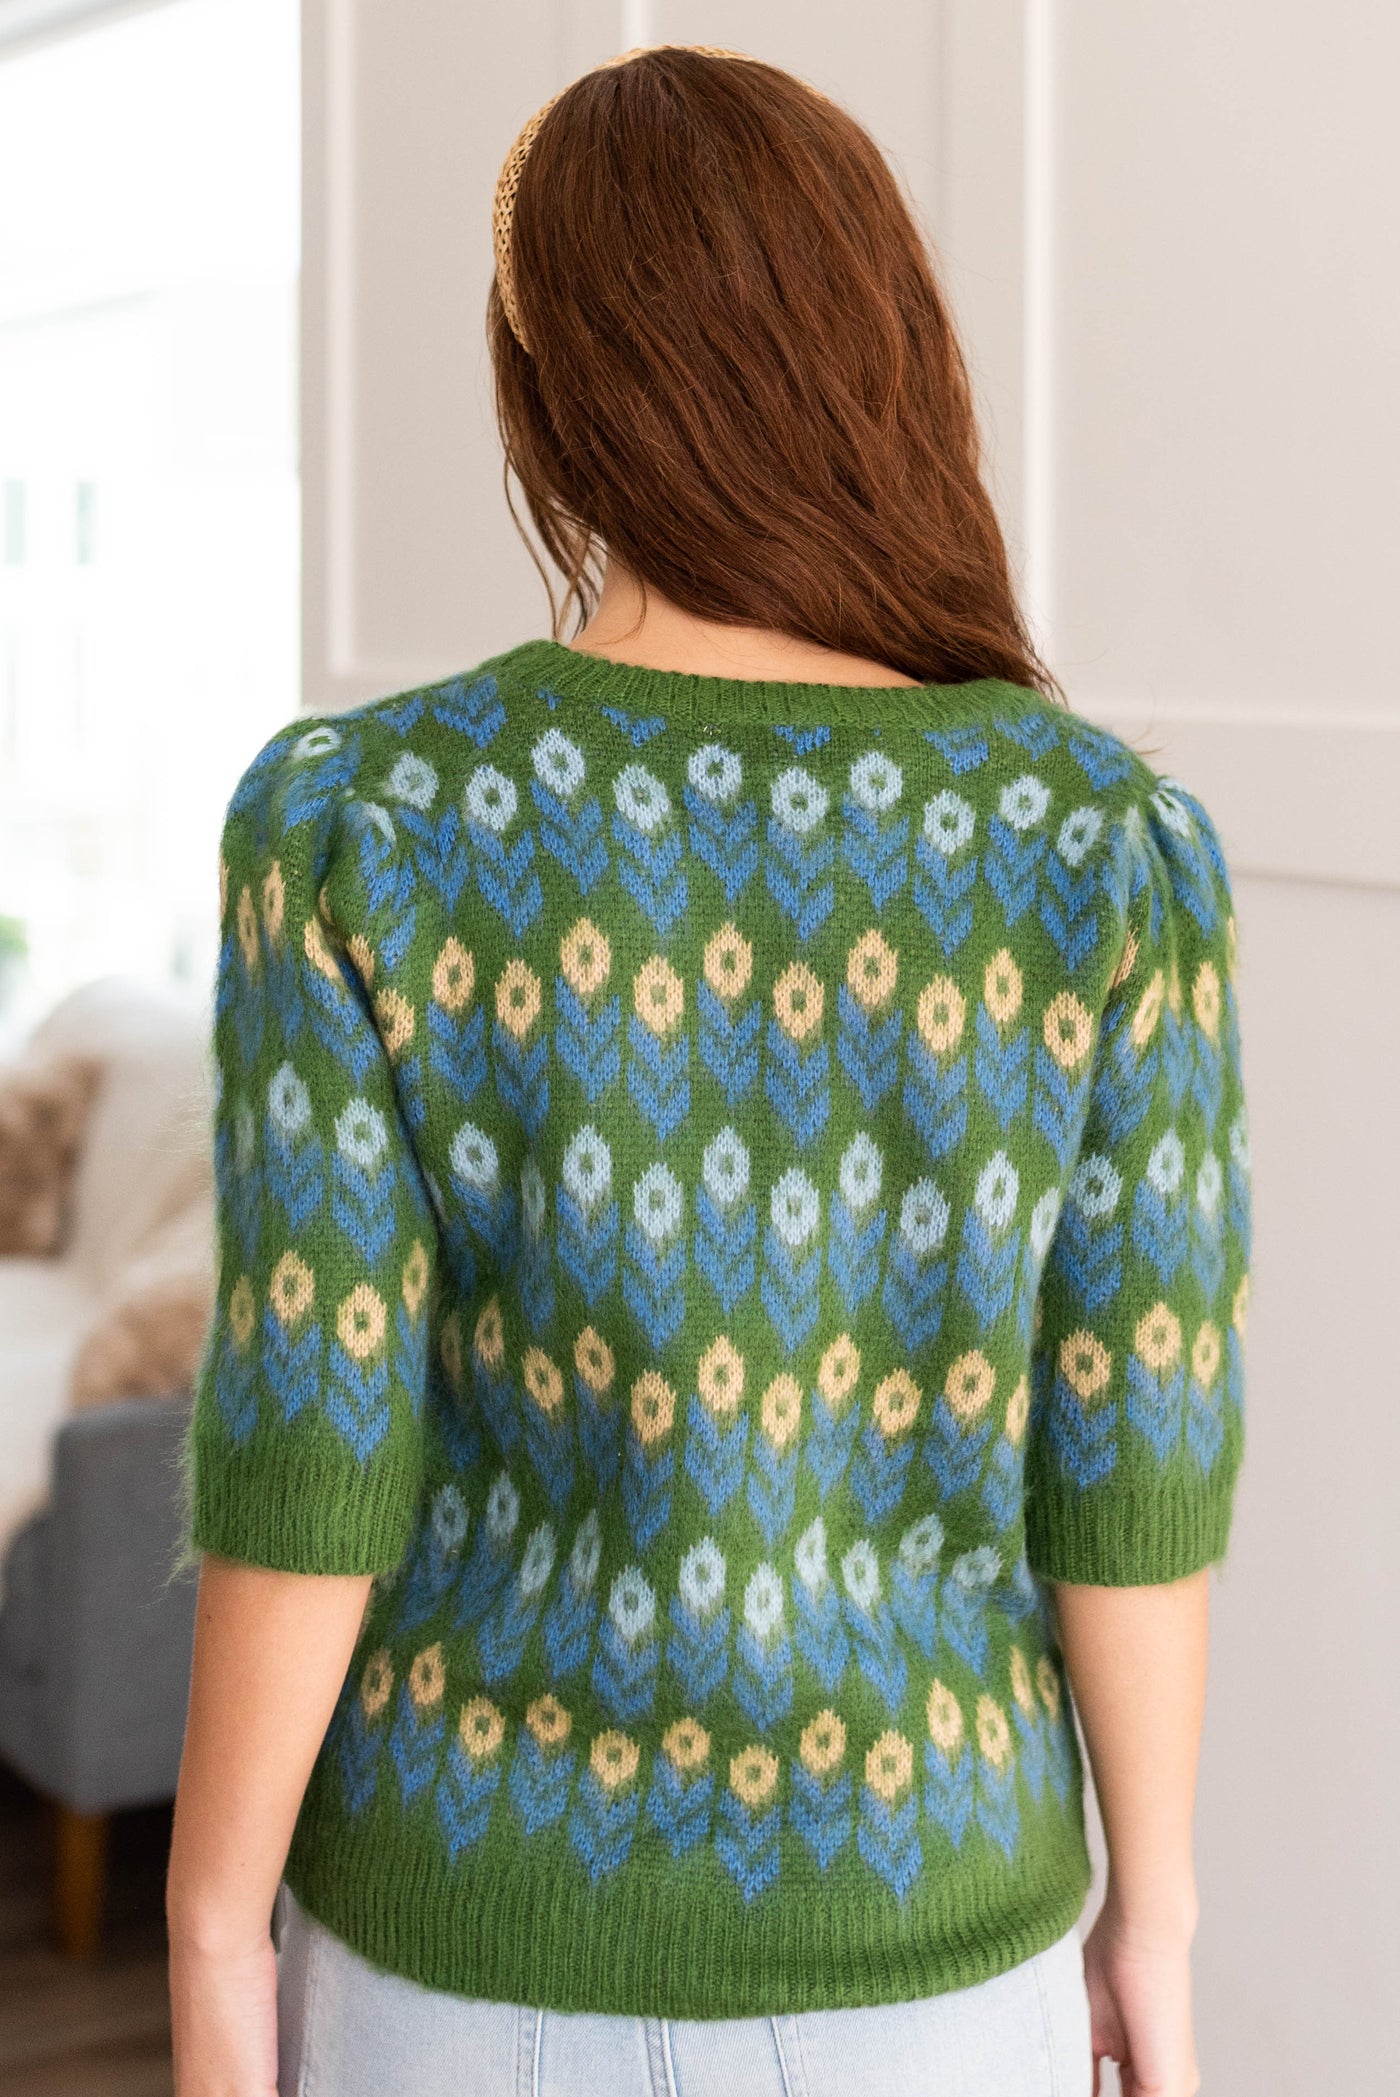 Back view of the green pattern top